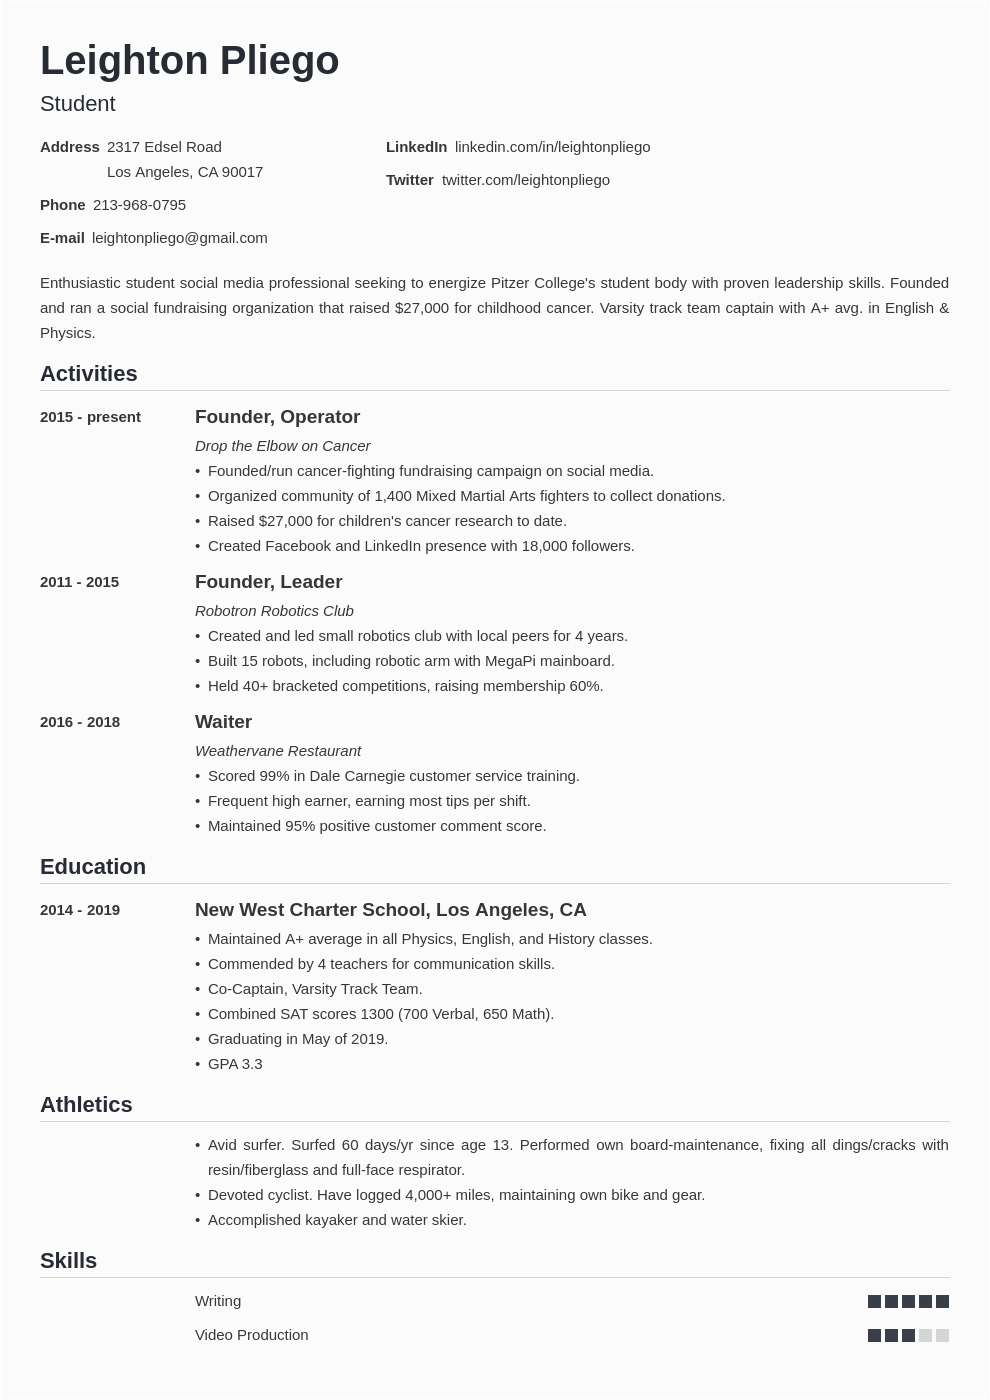 Sample Resume for College Application Template High School Resume for College Application Template